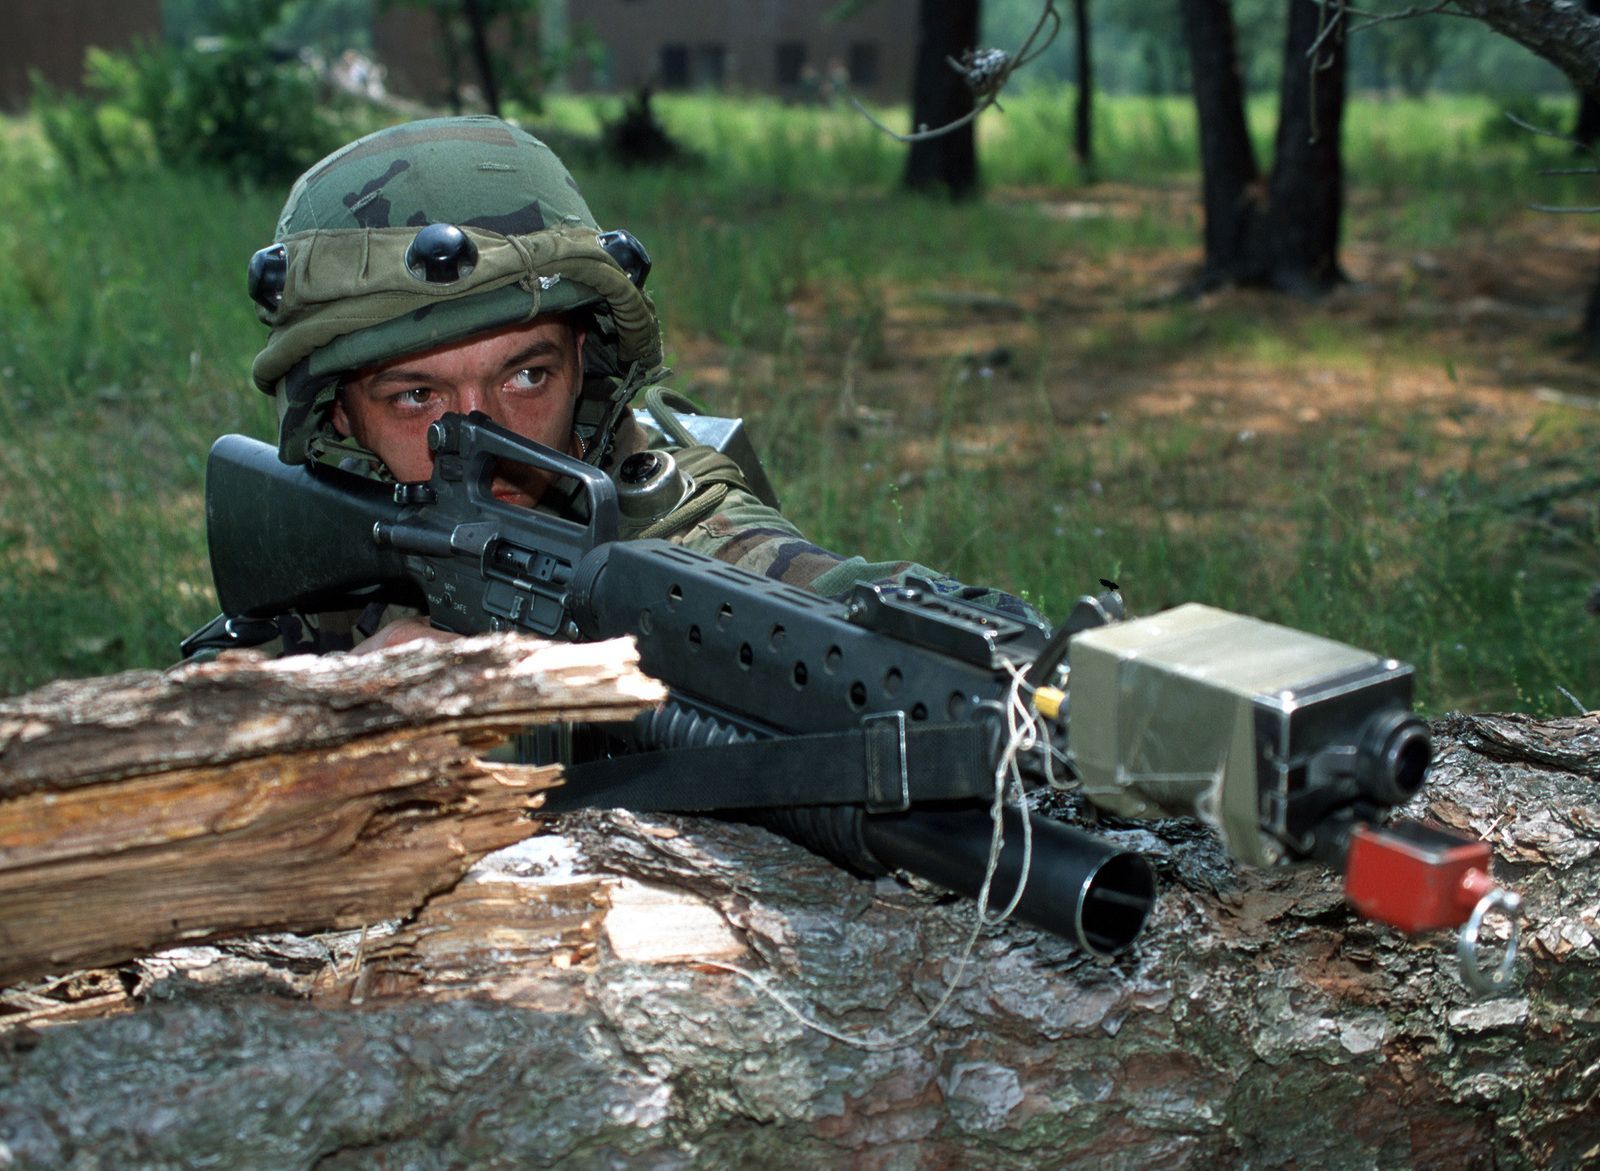 Scene Caption: Wearing a Multiple Integrated Laser Engagement System (MILES) gear and armed with an M16A2 assault rifle Airman First Class Jodey Powell with the 94th Security Forces Squadron, Dobbins Air Force Base, Georgia repels attacking opposition forces at a mock village on Fort Dix, New Jersey.